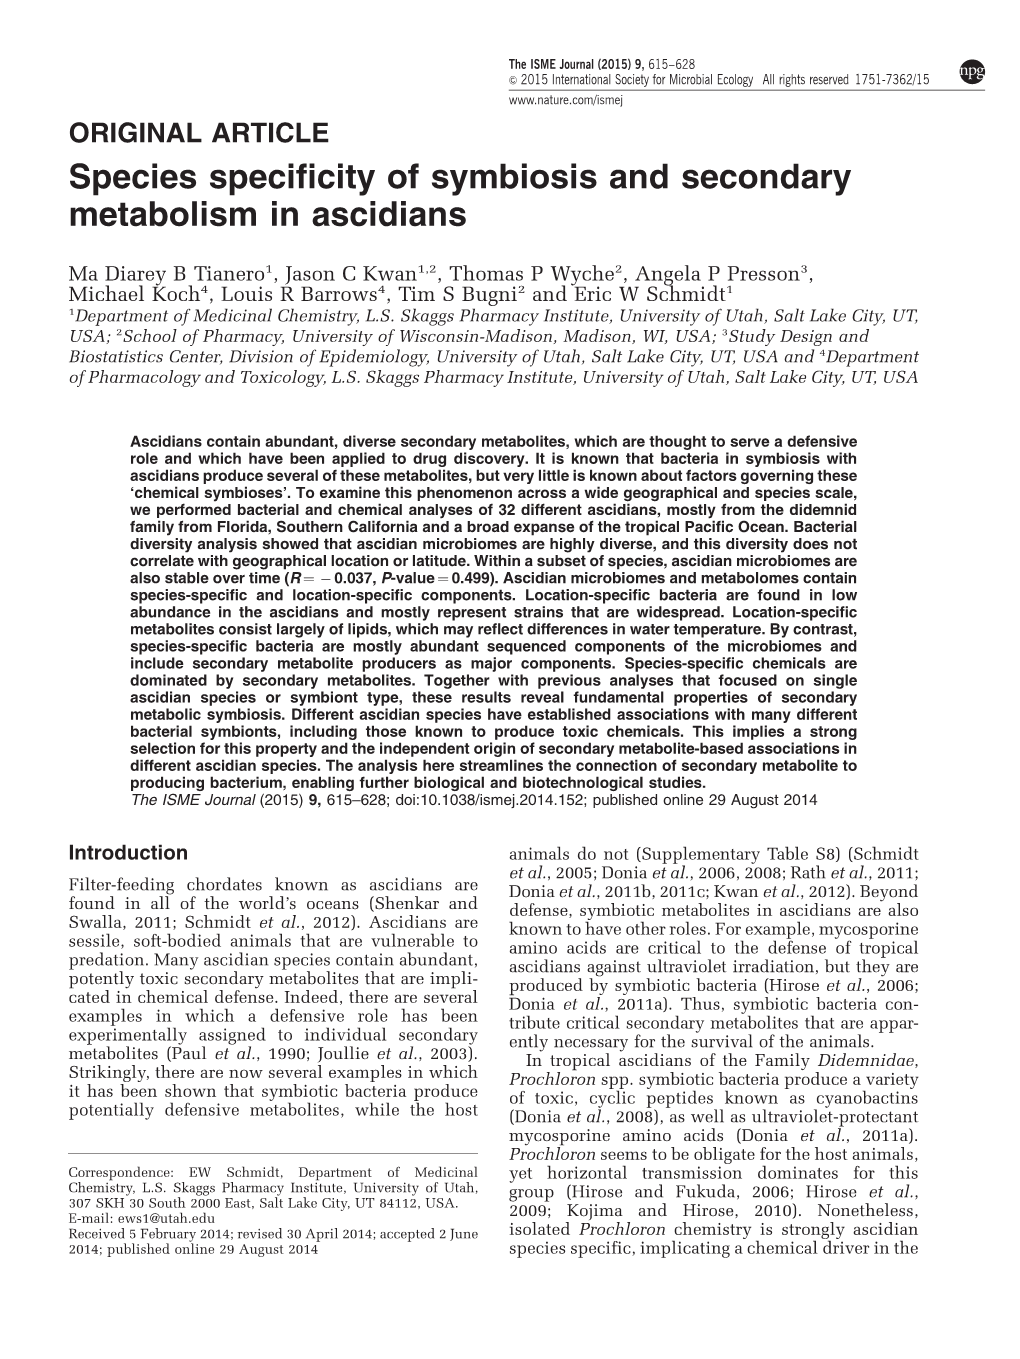 Species Specificity of Symbiosis and Secondary Metabolism in Ascidians